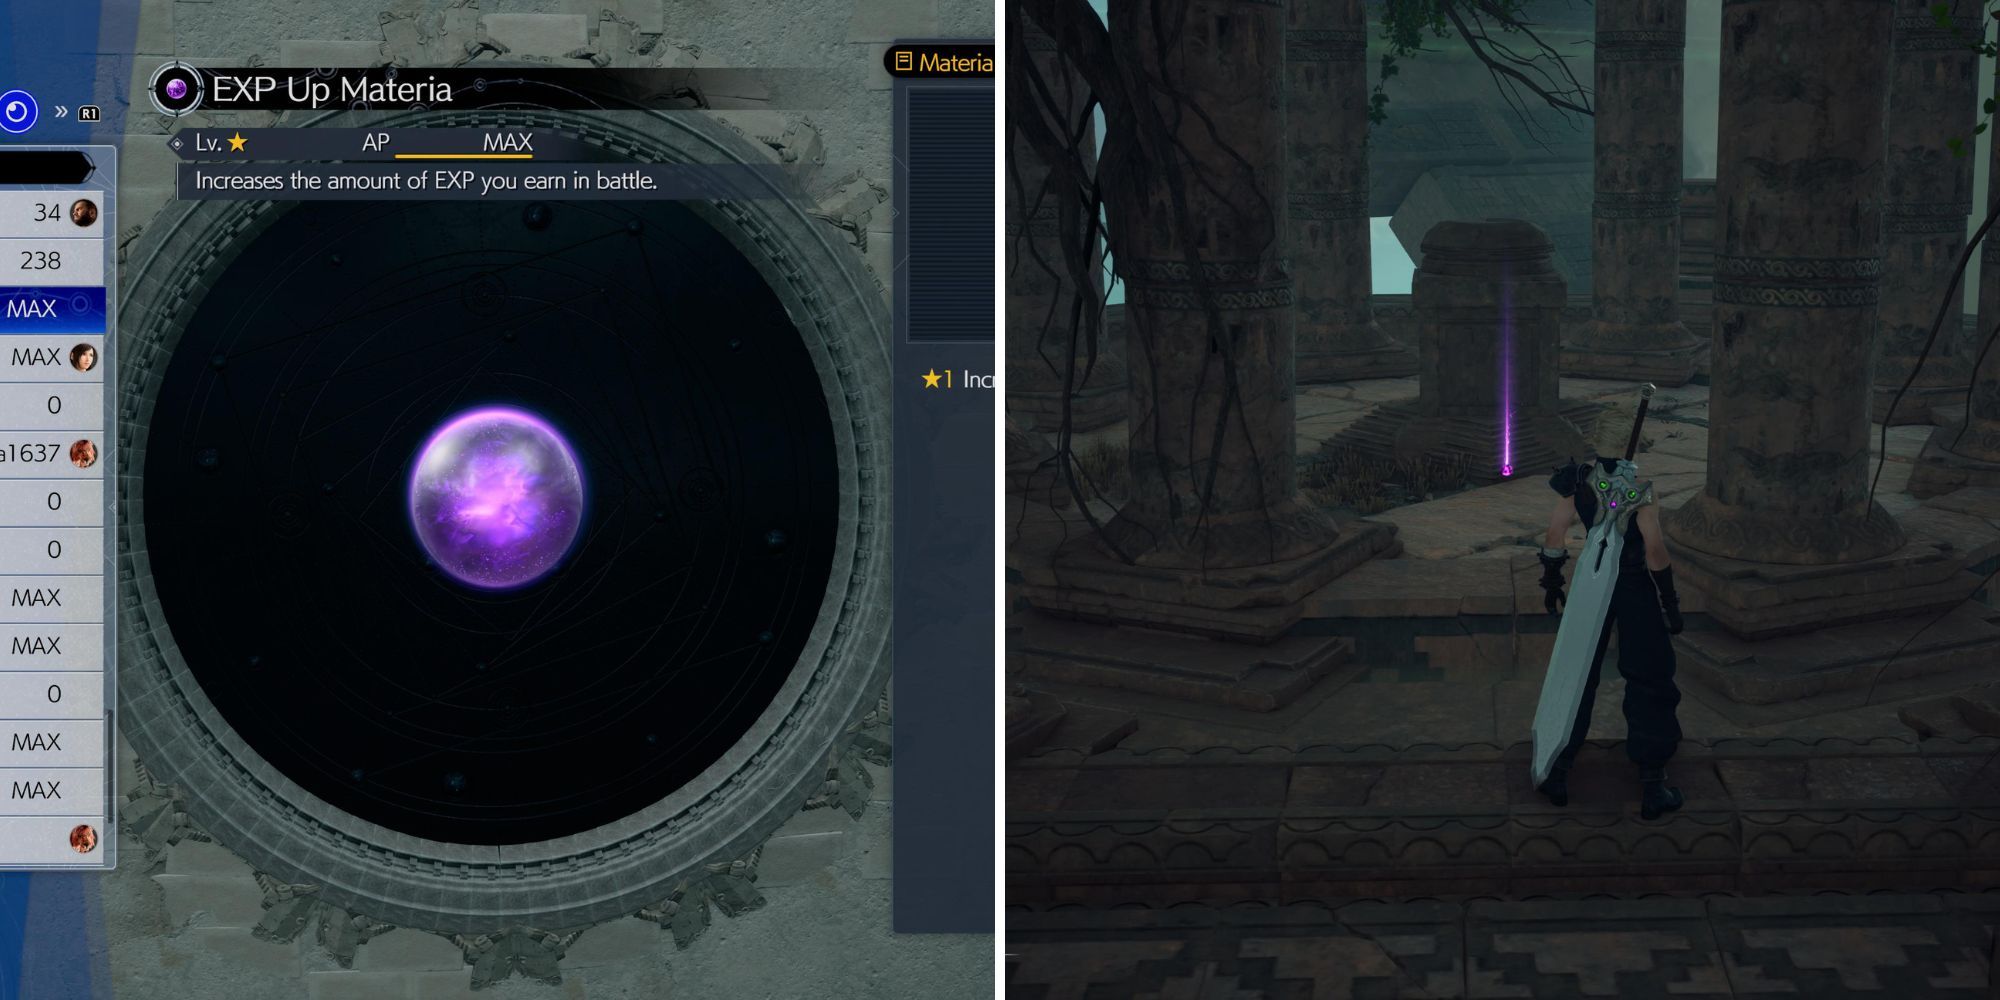 The EXP Up Materia In The Menu & Location In Game